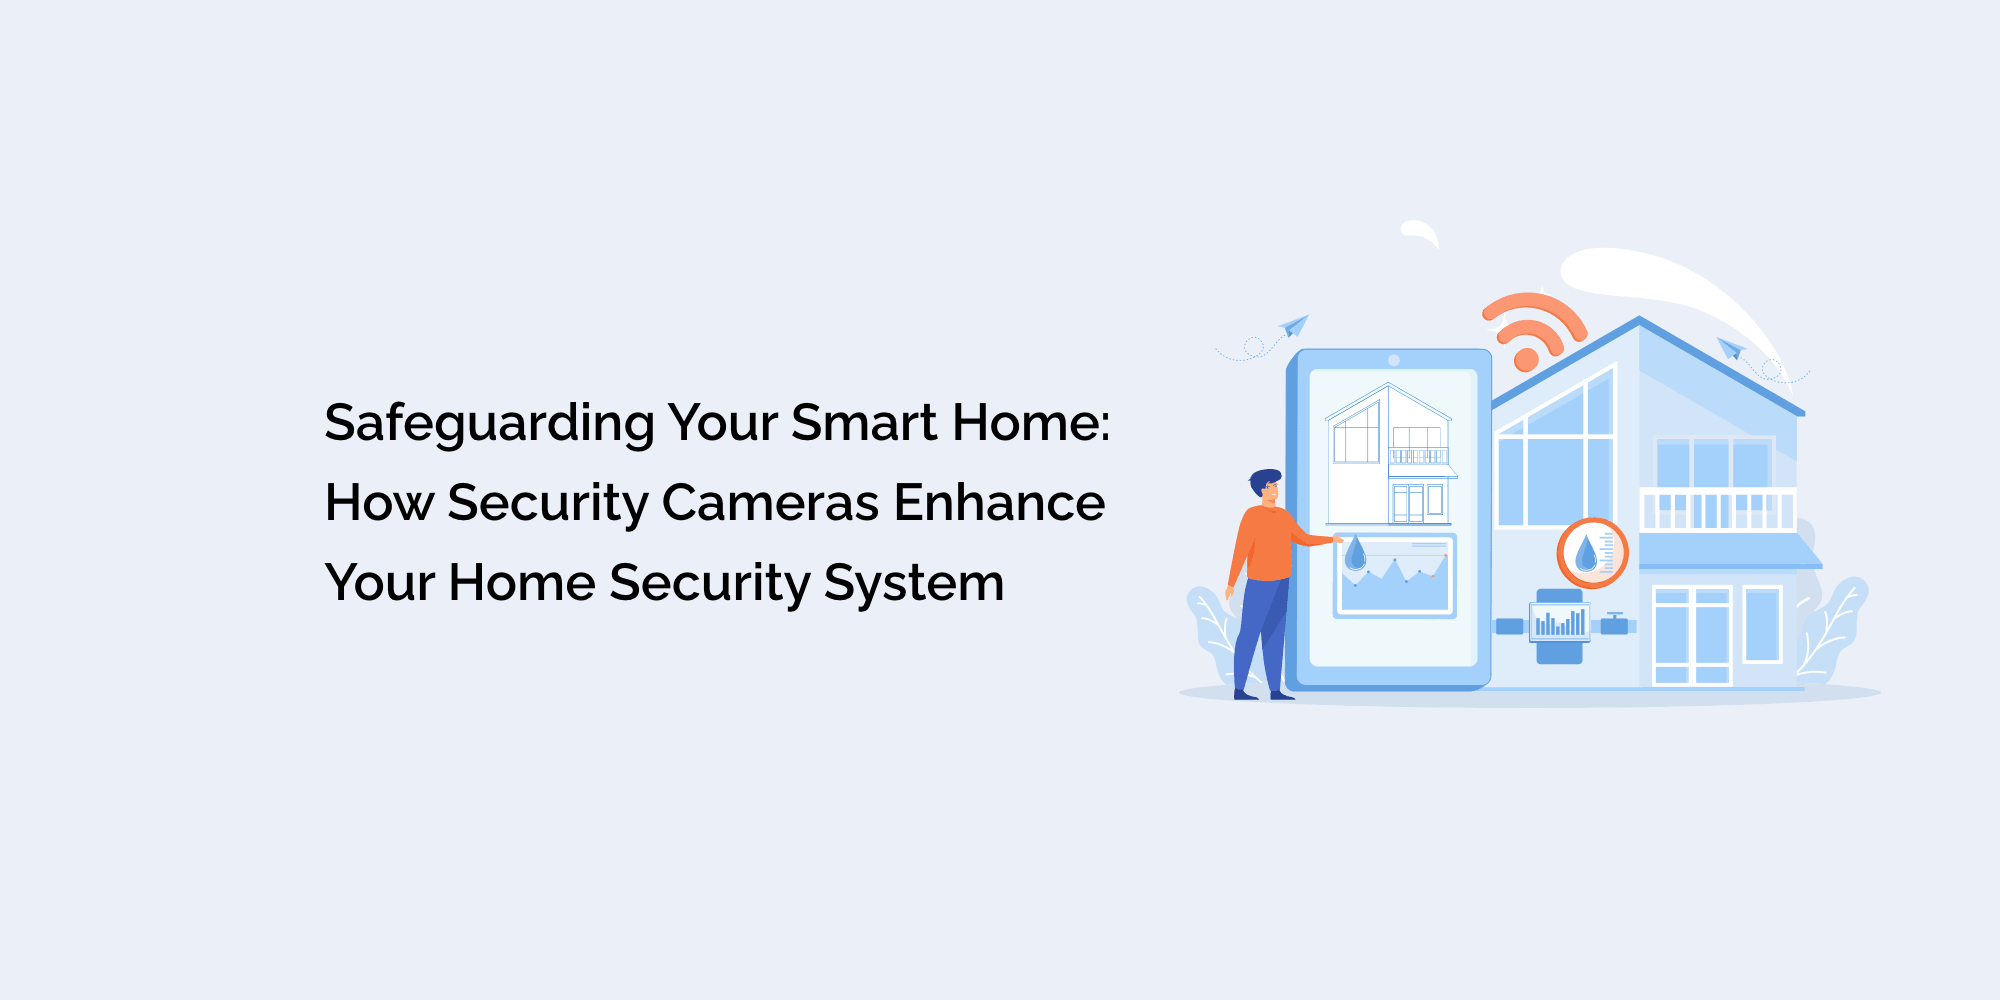 Safeguarding Your Smart Home: How Security Cameras Enhance Your Home Security System